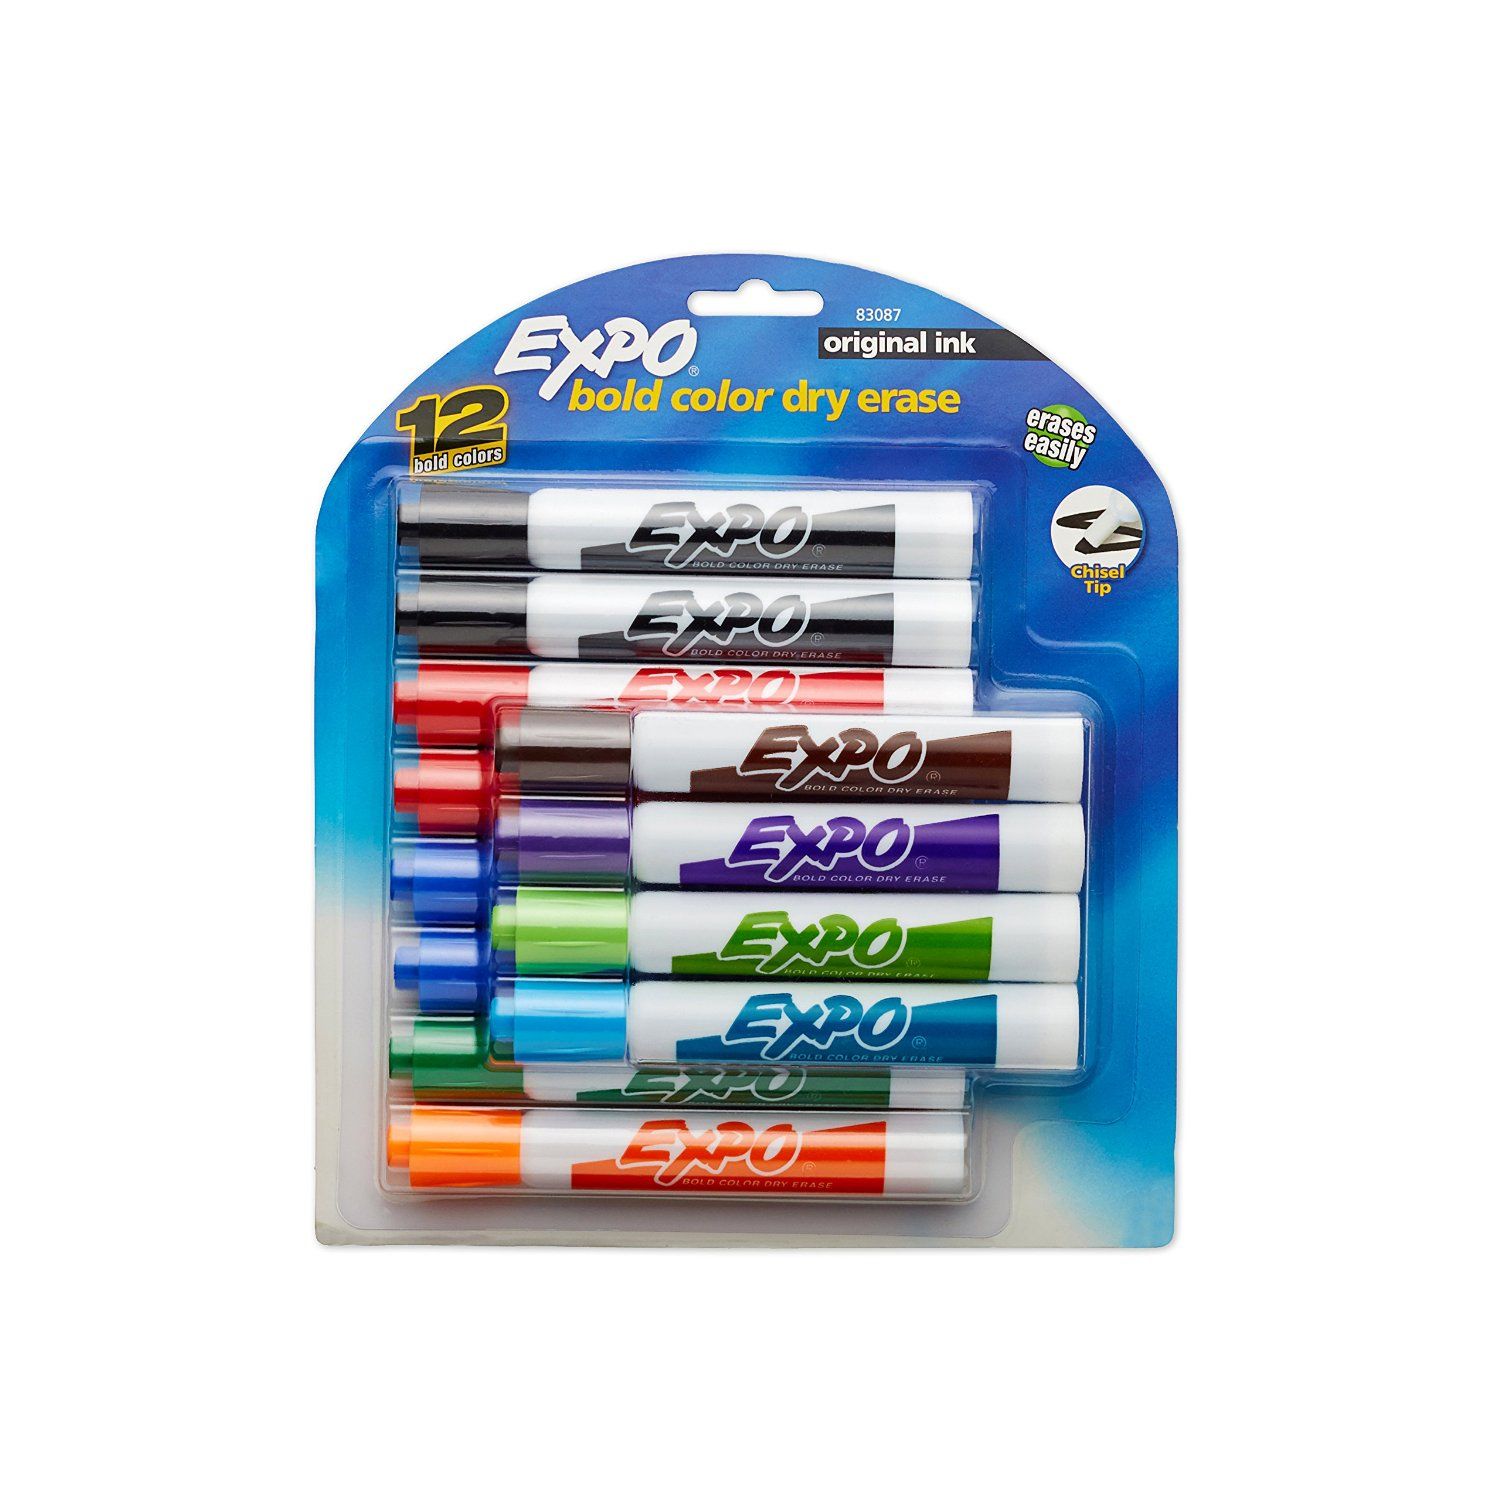 School Smart Low Odor Non-Toxic Dry Erase Tank Style Marker, Chisel Tip, Assorted, Pack of 48